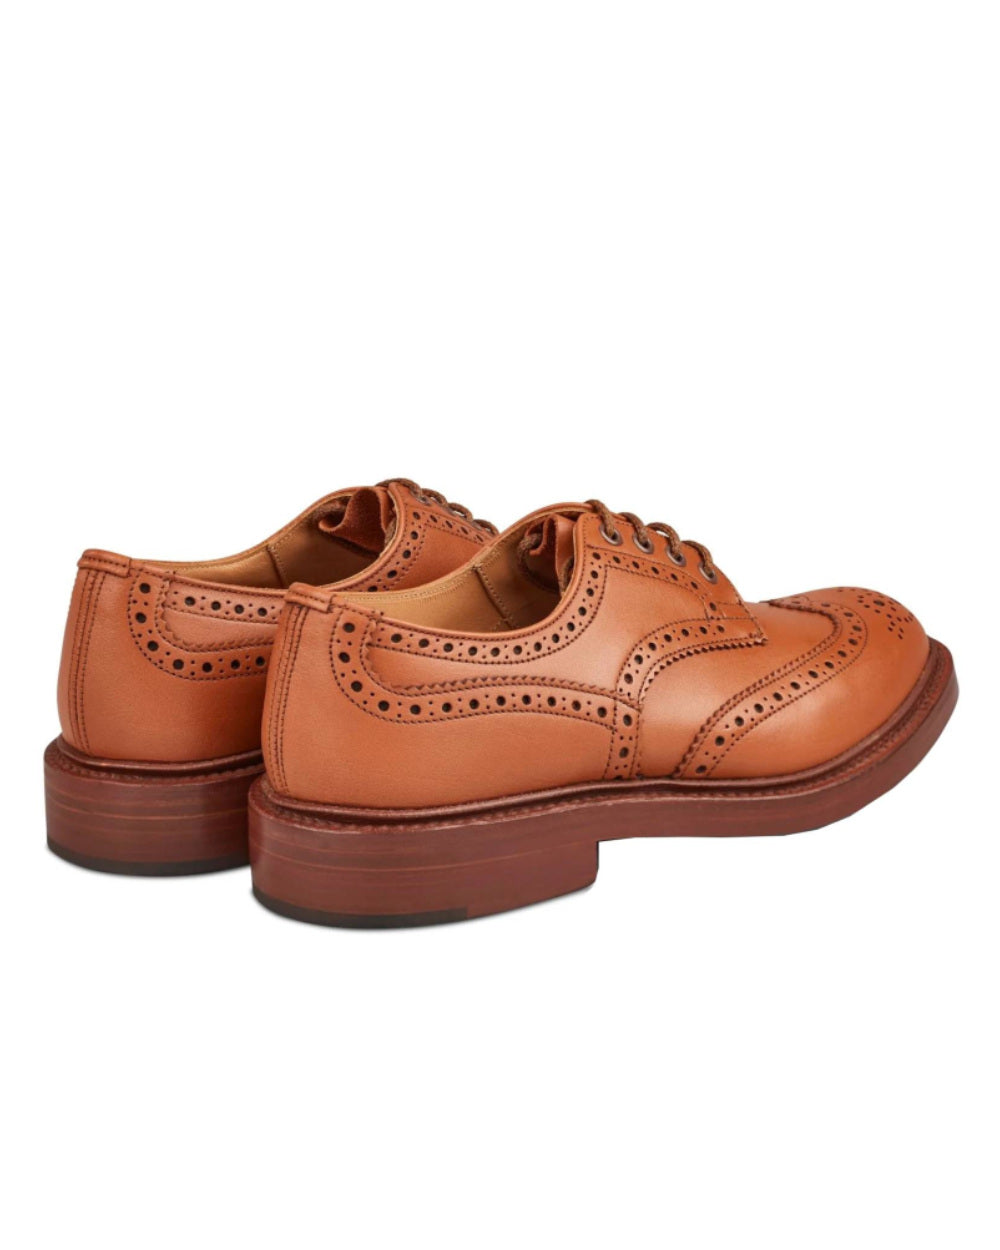 Tan Coloured Trickers Bourton Country Shoe On A White Background 